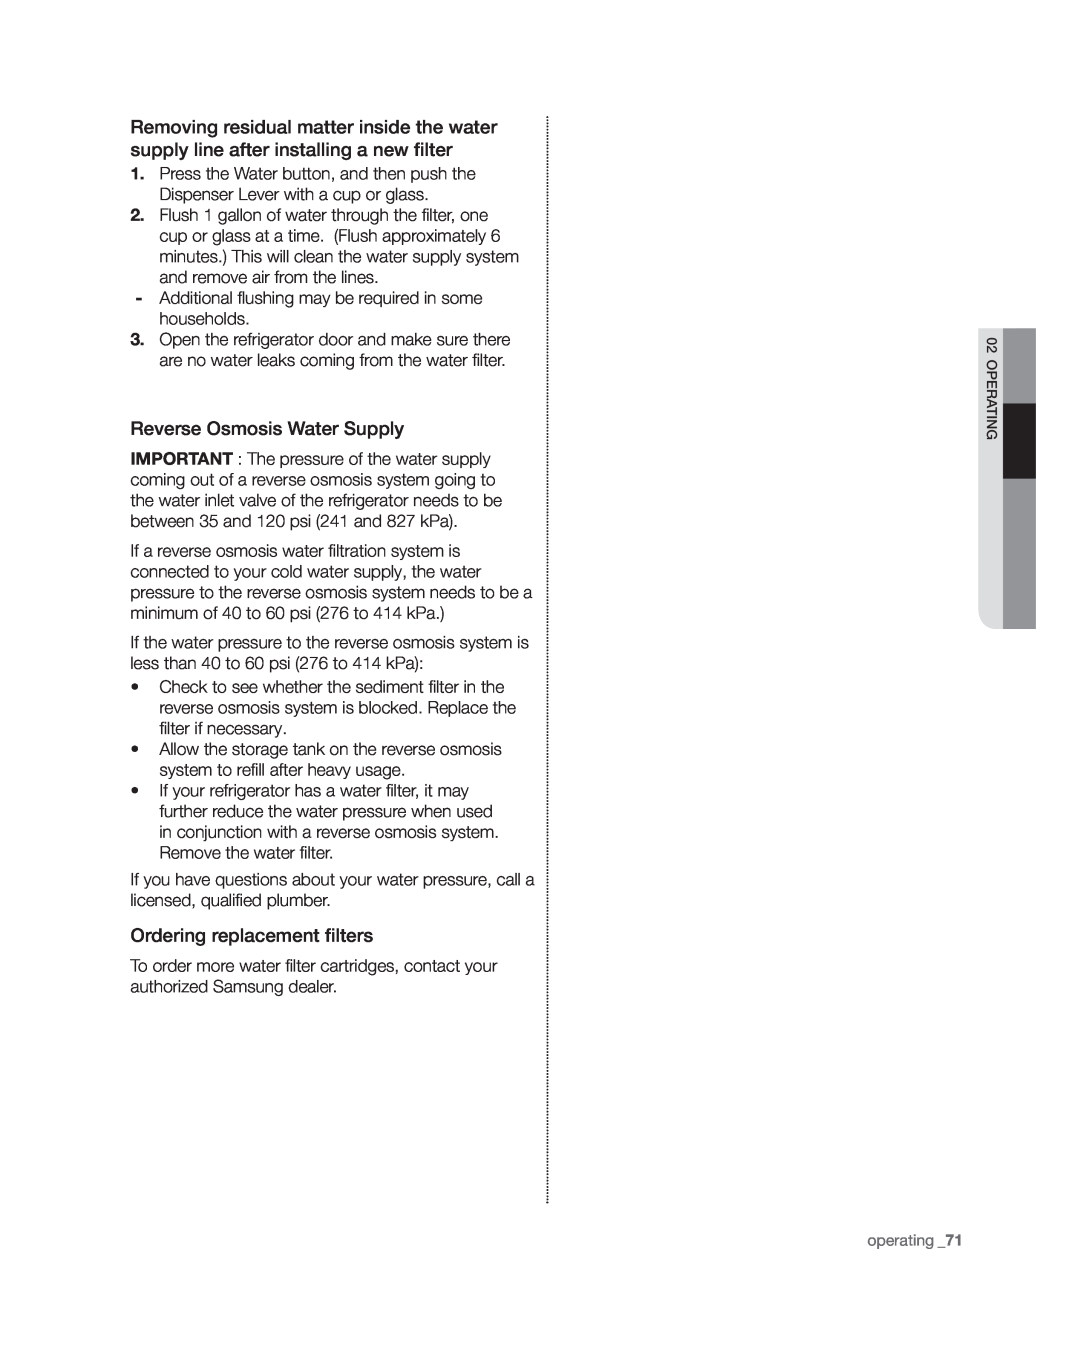 Samsung RSG309** user manual Reverse Osmosis Water Supply, Ordering replacement filters 